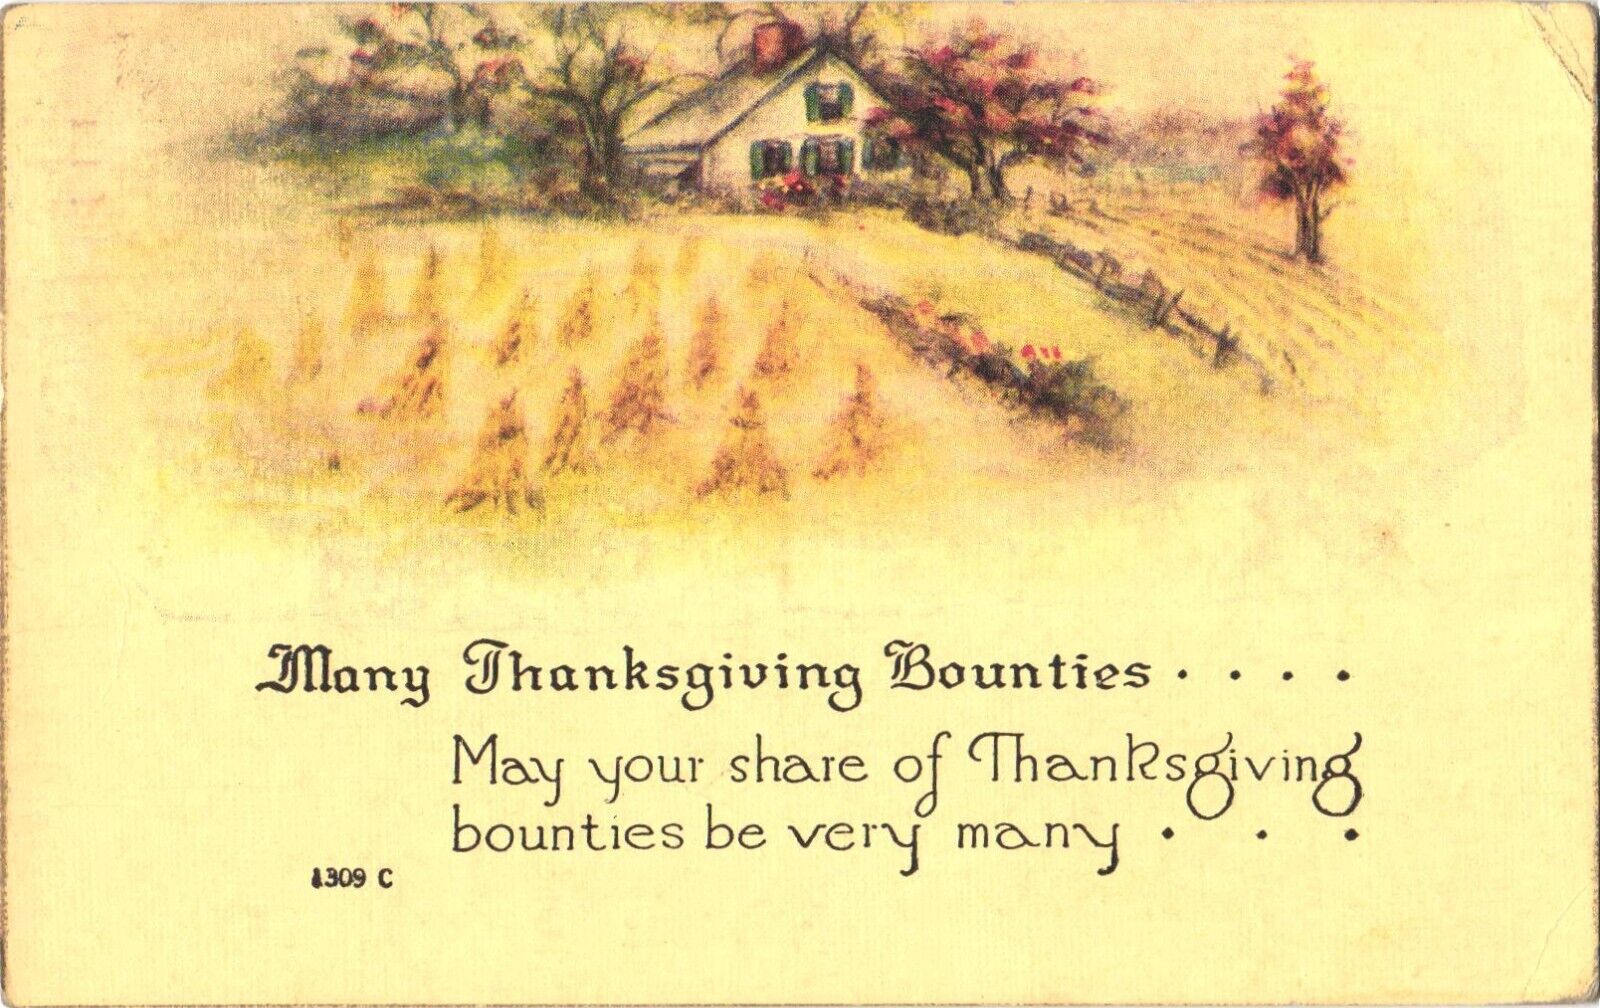 Many Thanksgiving Bounties May Your Thanksgiving Bounties Be Very Many Postcard